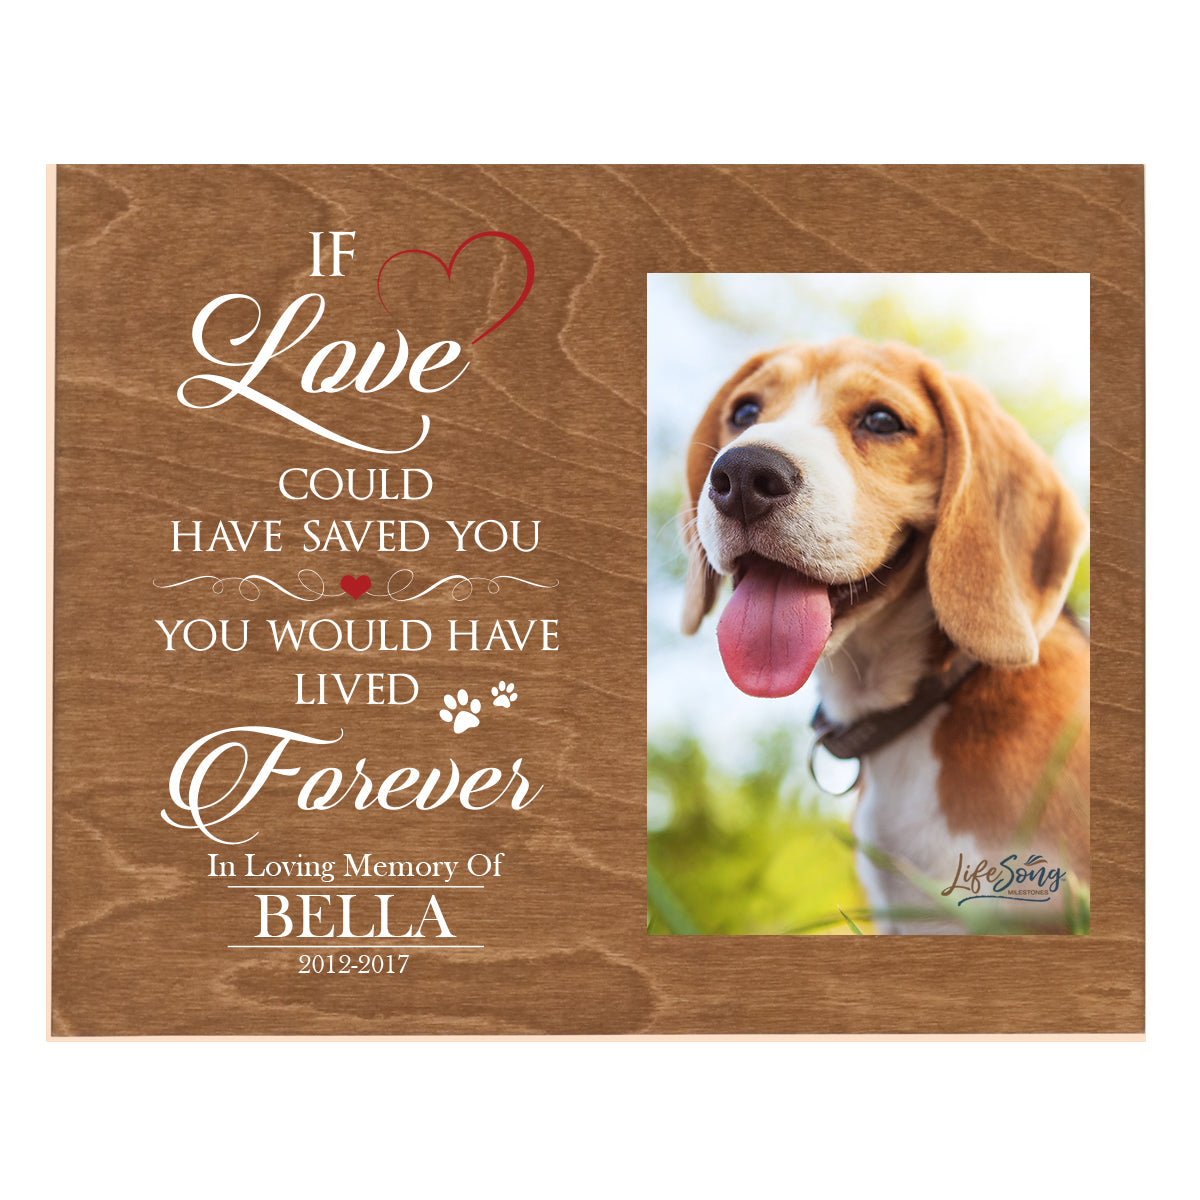 Pet Memorial Photo Wall Plaque Décor - If Love Could Have Saved You